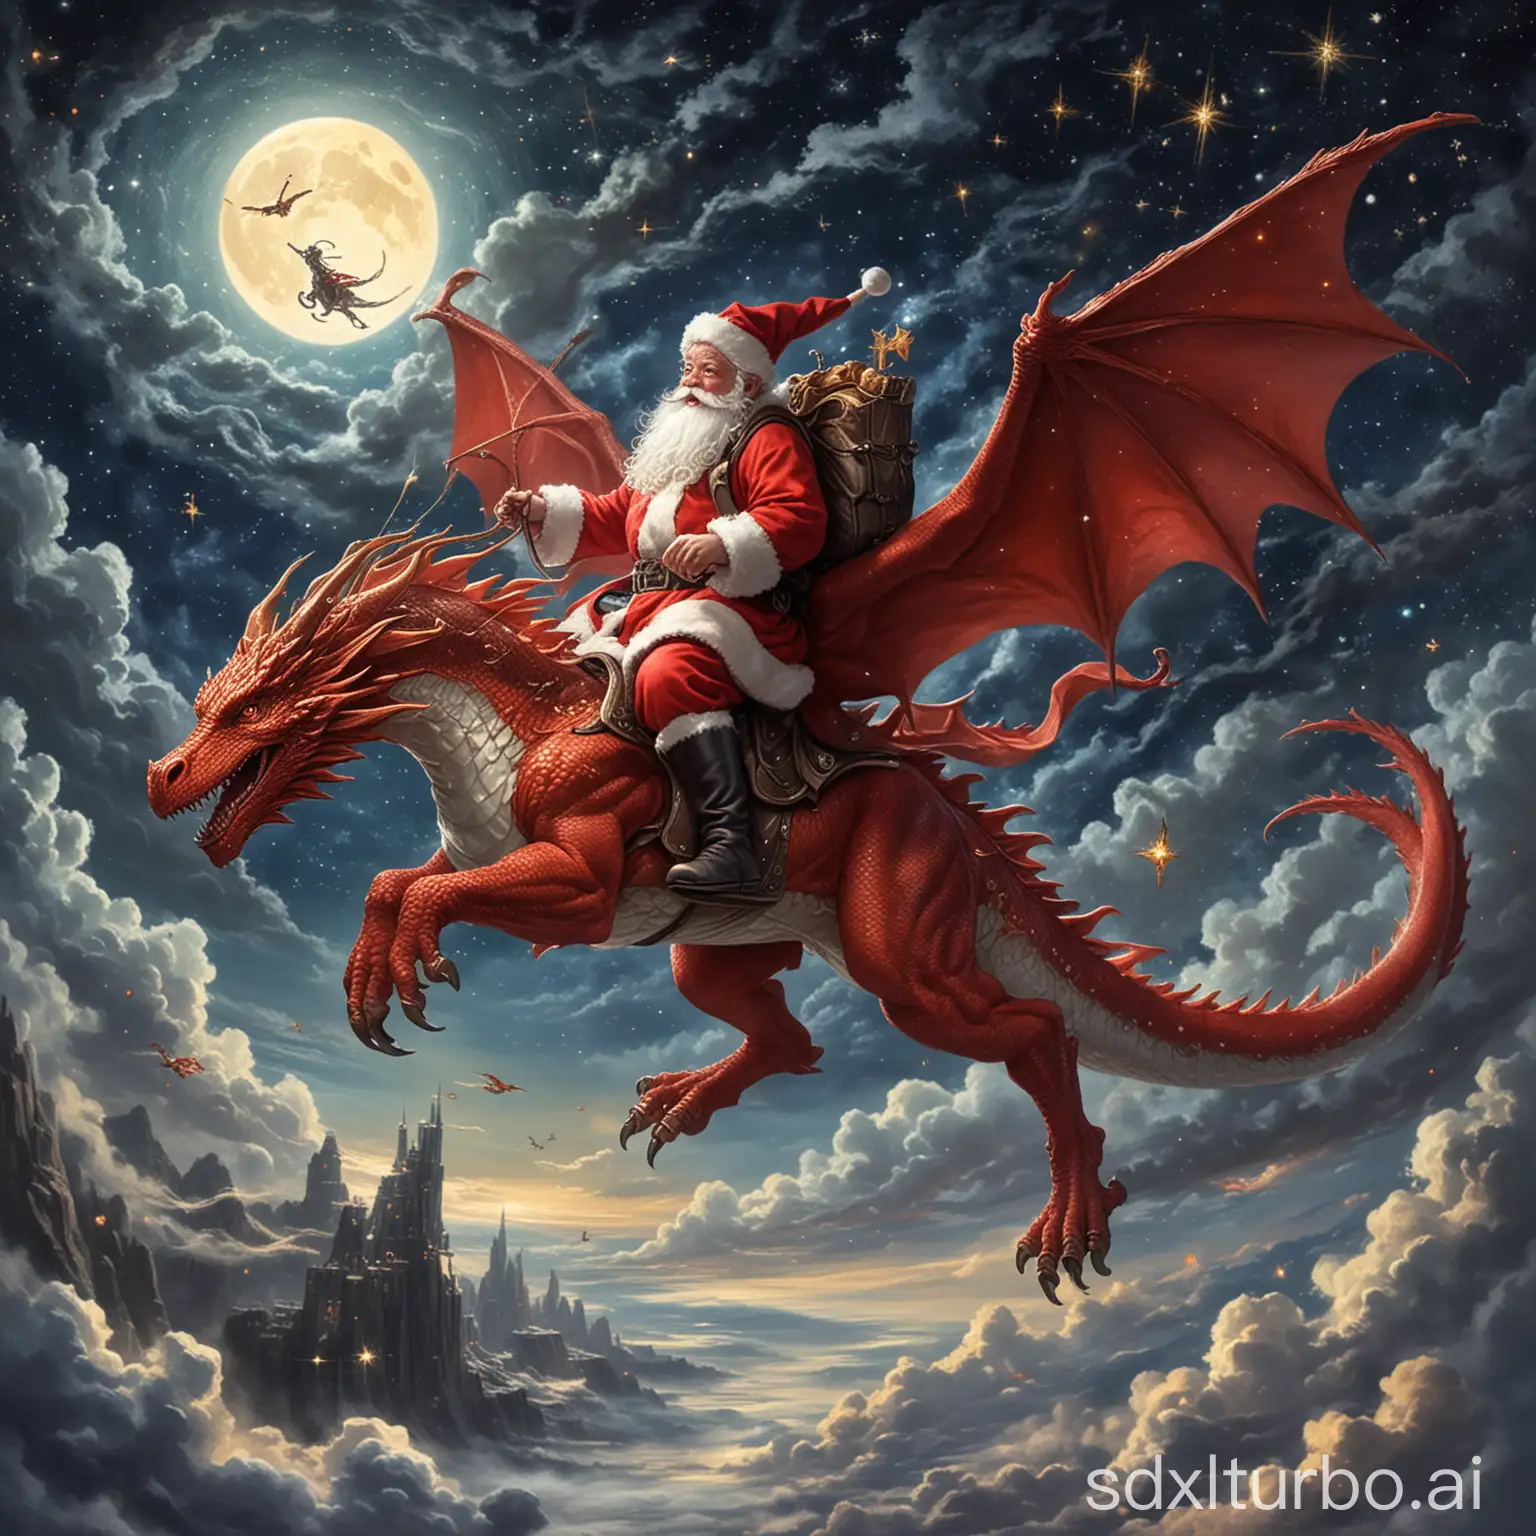 Santa, how he rides on a gleaming flying dragon, which carries him high into the night sky, where the stars are his only companions.